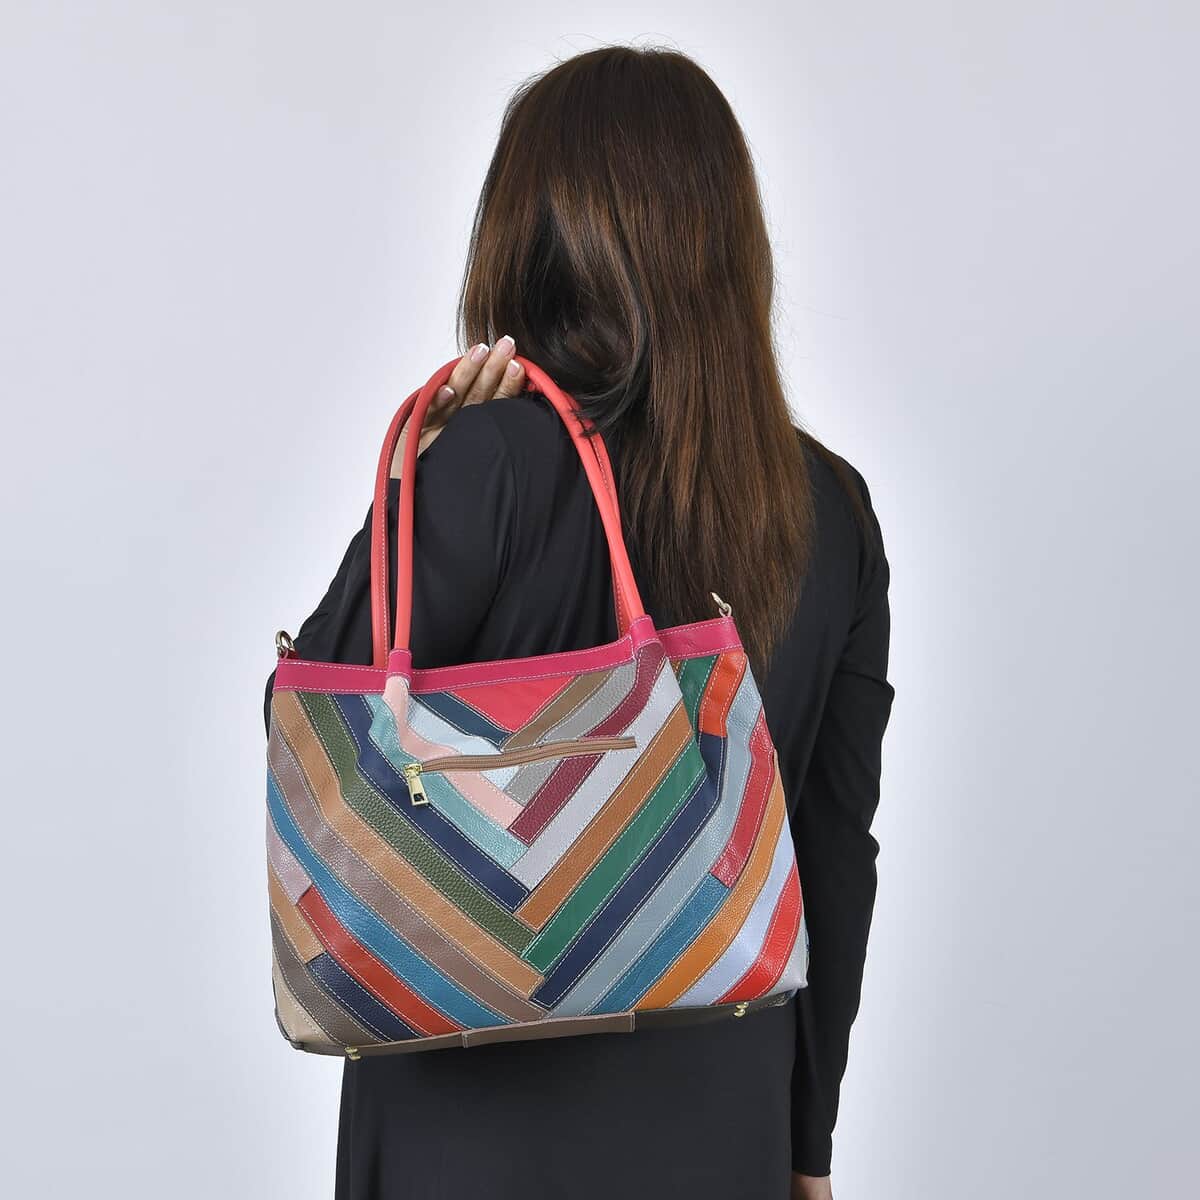 Rainbow Color Chevron Pattern Genuine Leather Tote Bag (14.96"x5.9"x11.81") with Long Strap image number 2